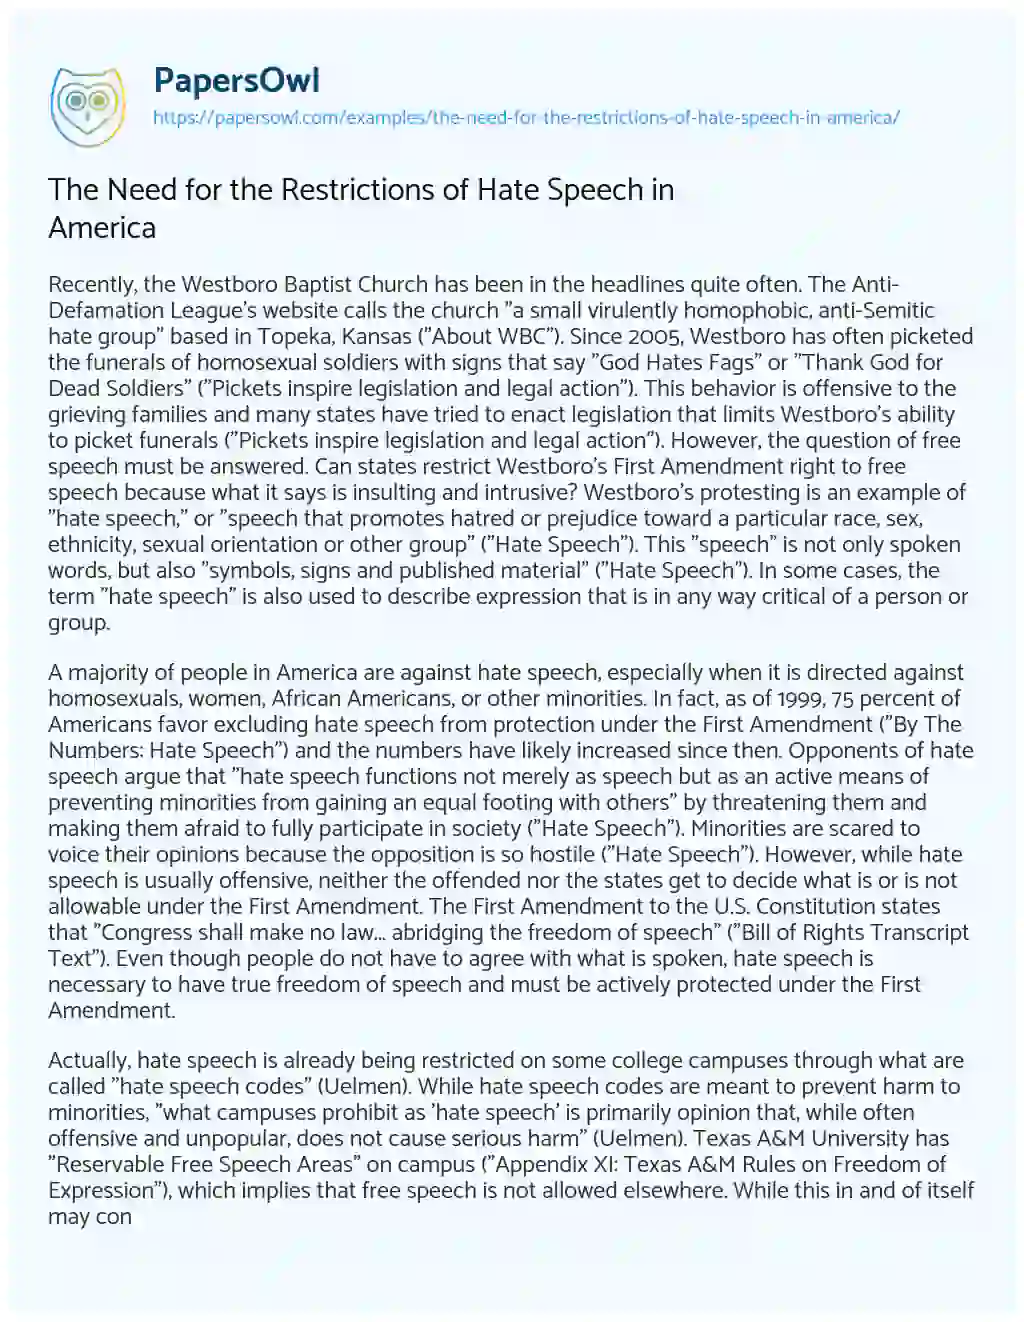 Essay on The Need for the Restrictions of Hate Speech in America